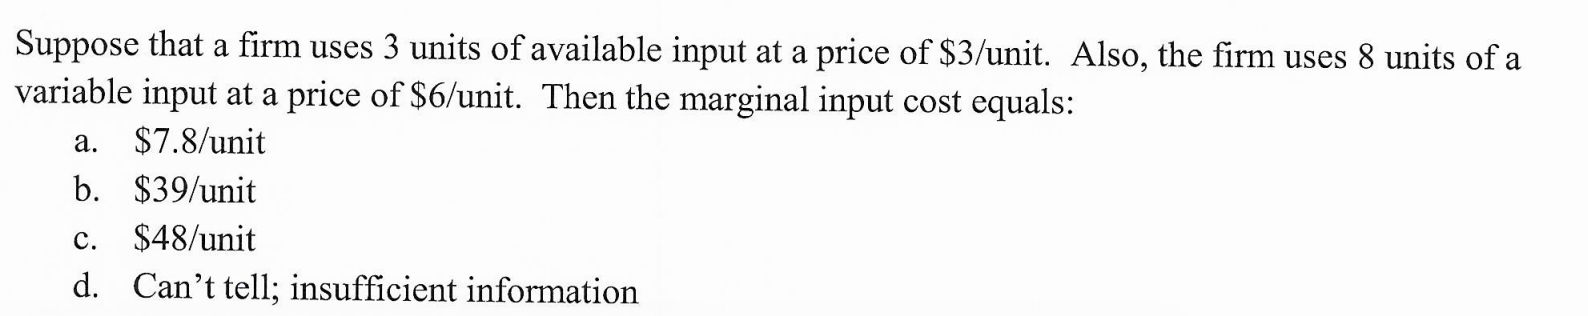 Suppose that a firm uses 3 units of available input at a price of $3/unit. Also, the firm uses 8 units of a
variable input at a price of $6/unit. Then the marginal input cost equals:
$7.8/unit
а.
b. $39/unit
$48/unit
с.
d. Can't tell; insufficient information
